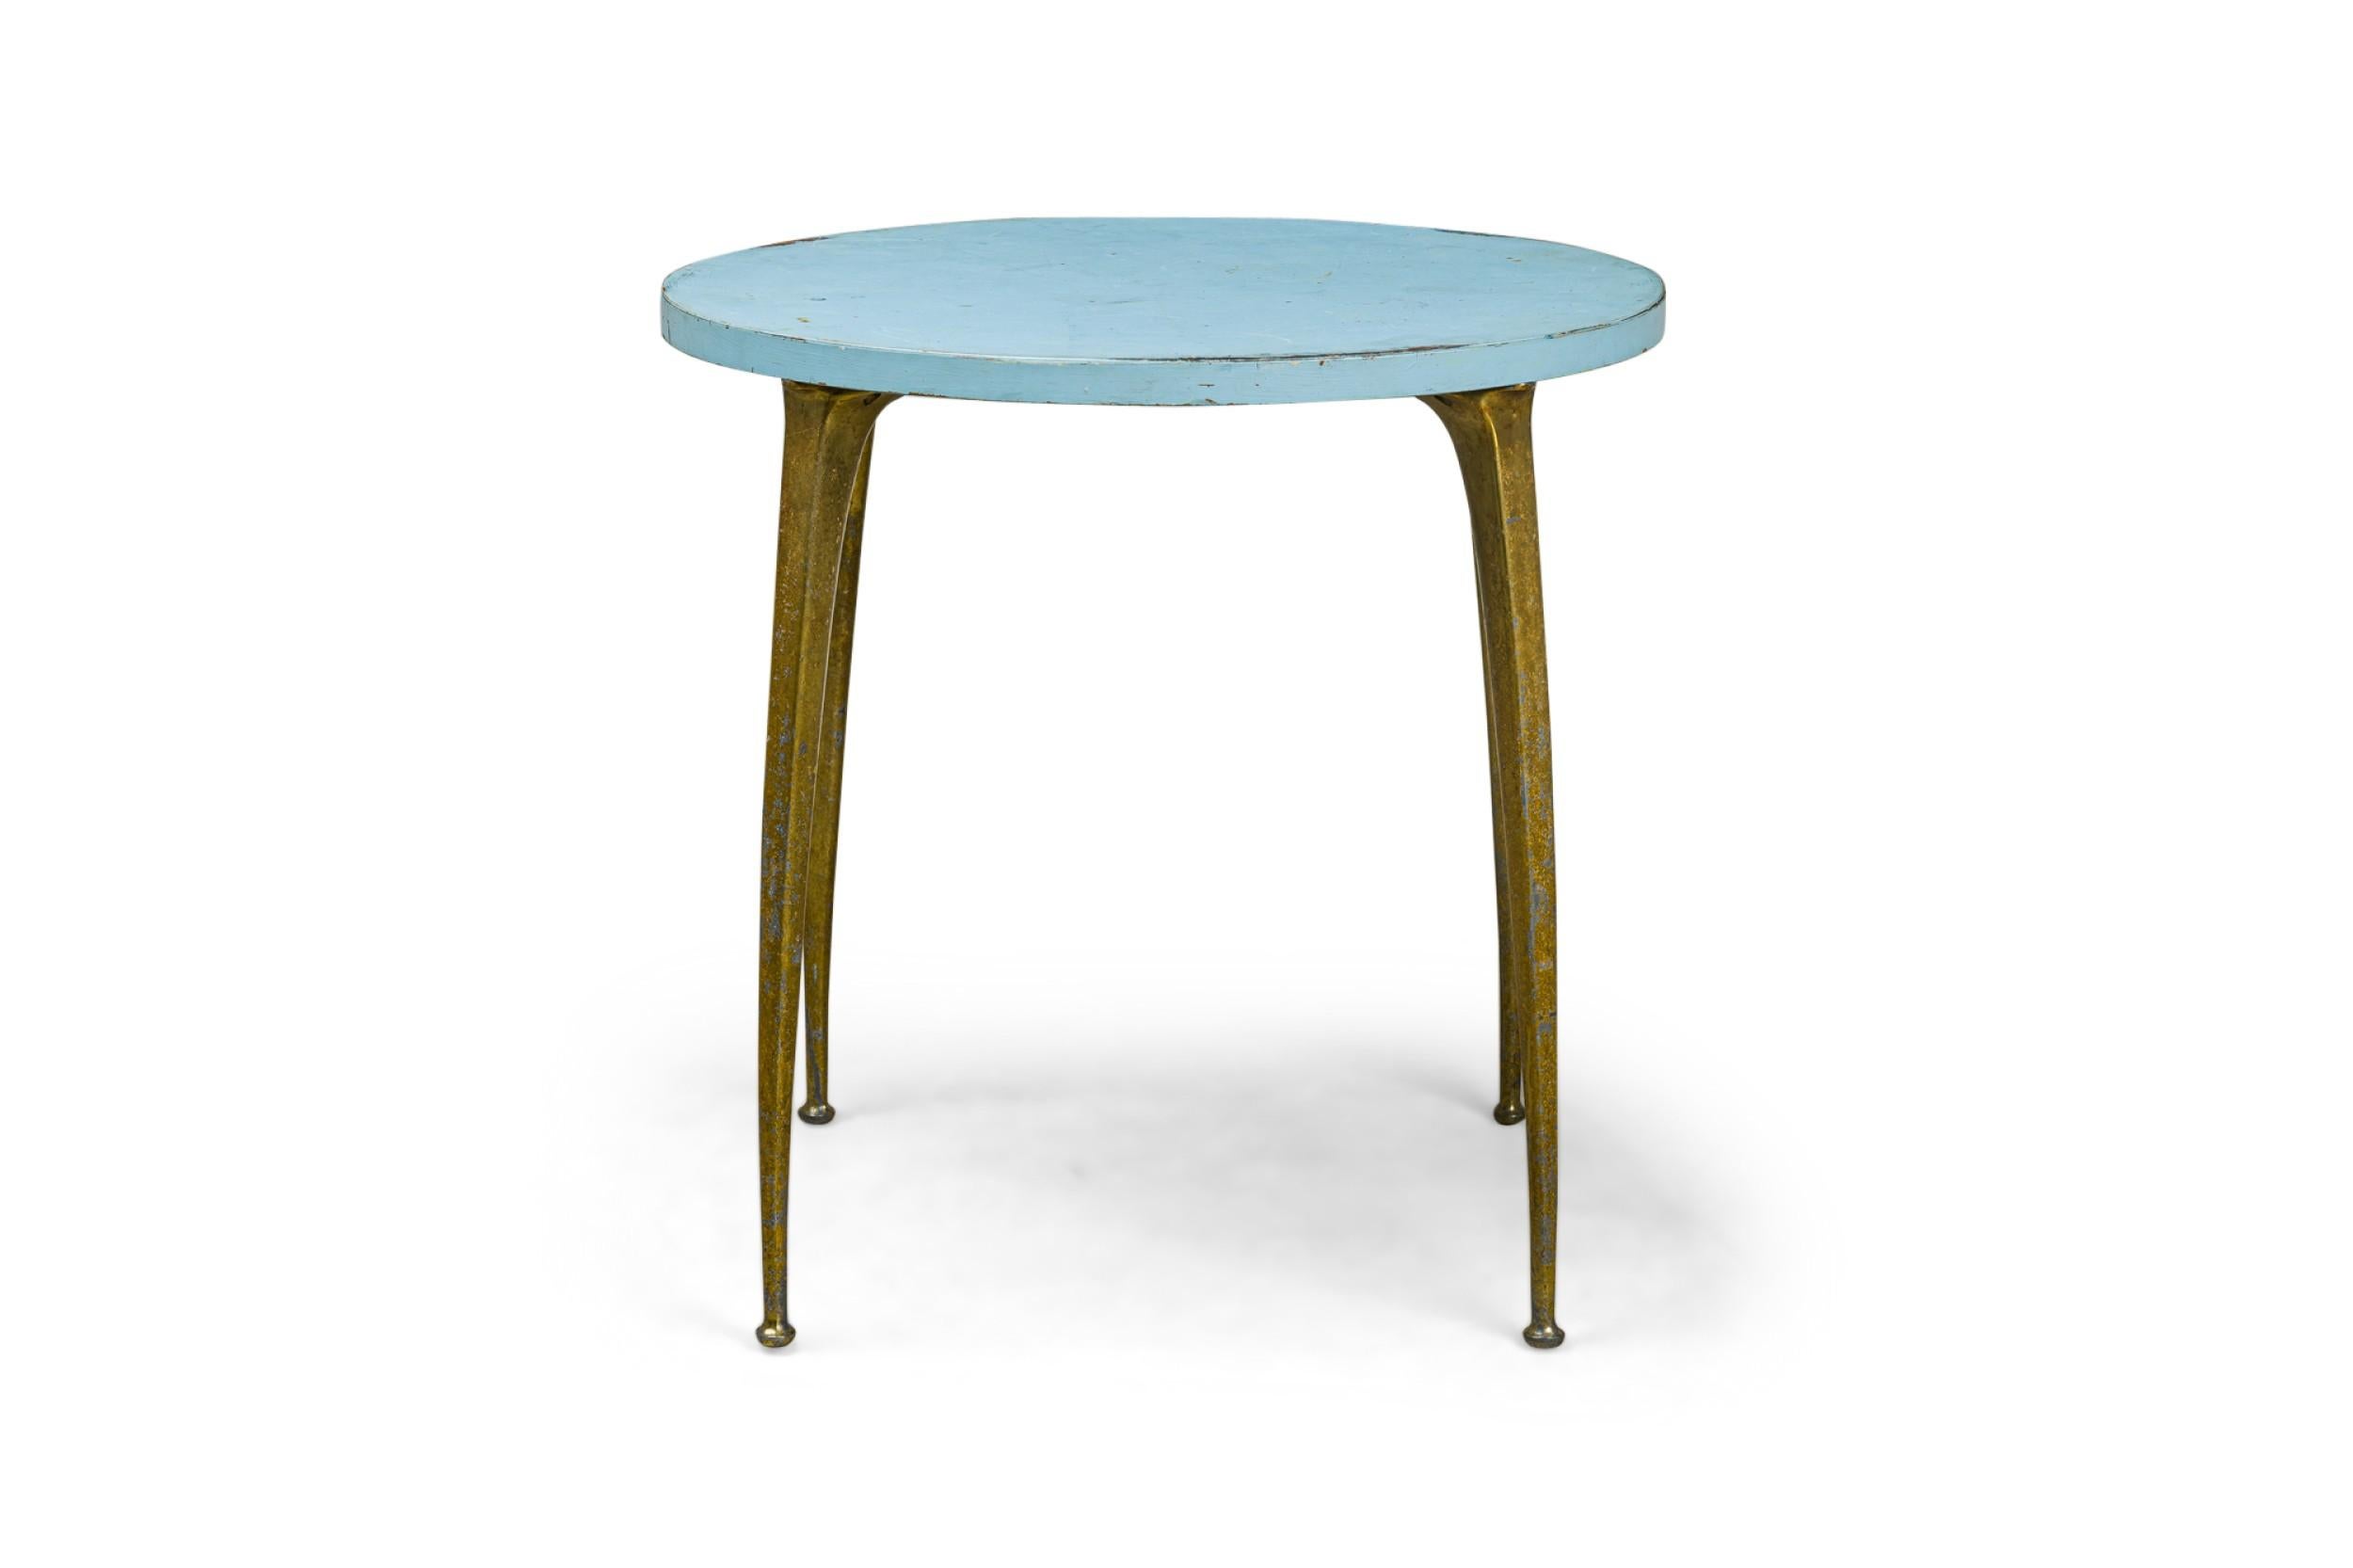 Italian Mid-Century Modern center / breakfast table with a sky blue enameled circular wood top, resting on four sculptural brass legs tapering toward the bottom. (in the style of GIO PONTI)
 

 Wear to finish.
